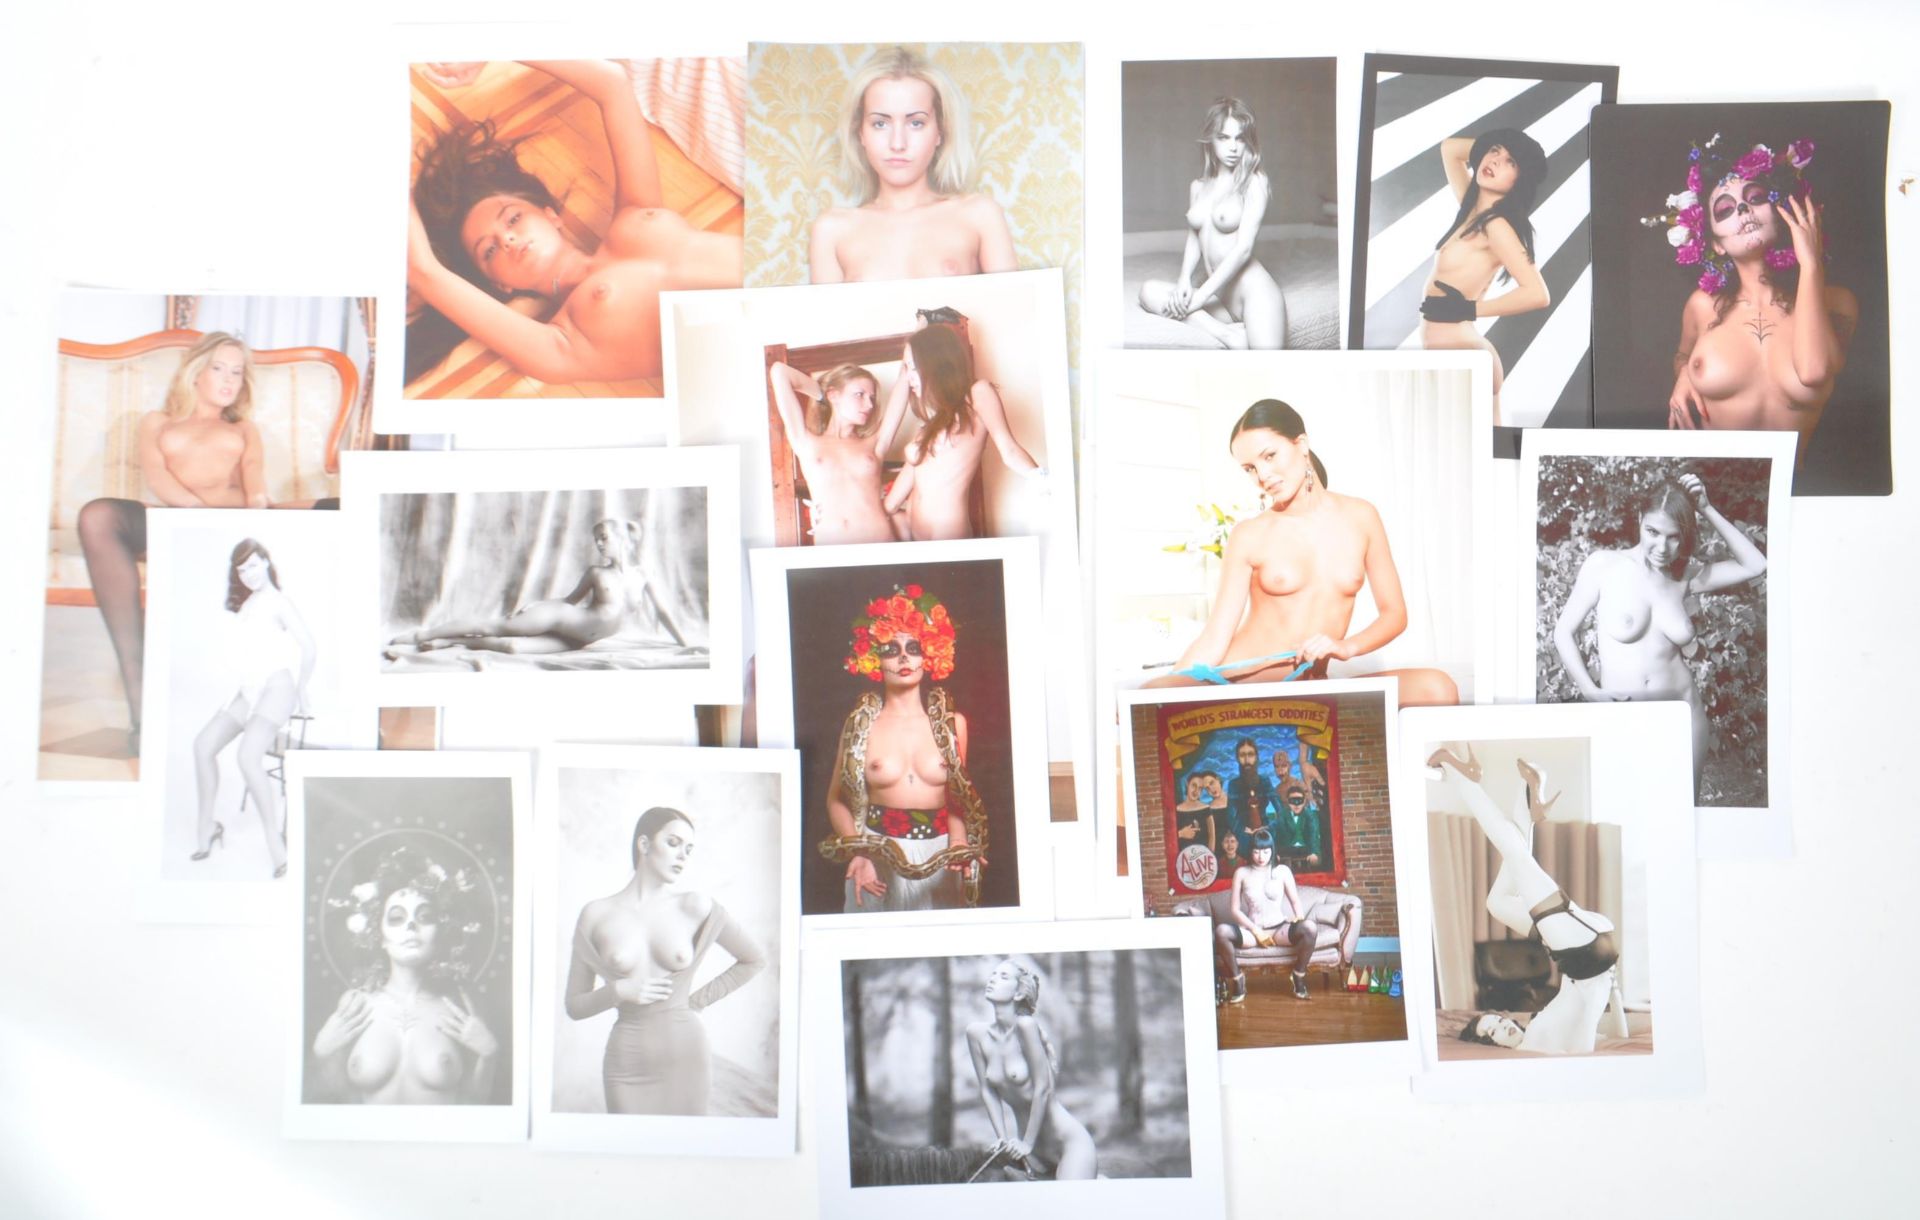 COLLECTION OF FIFTY SIX ART GLAMOUR NUDE EROTIC PHOTO